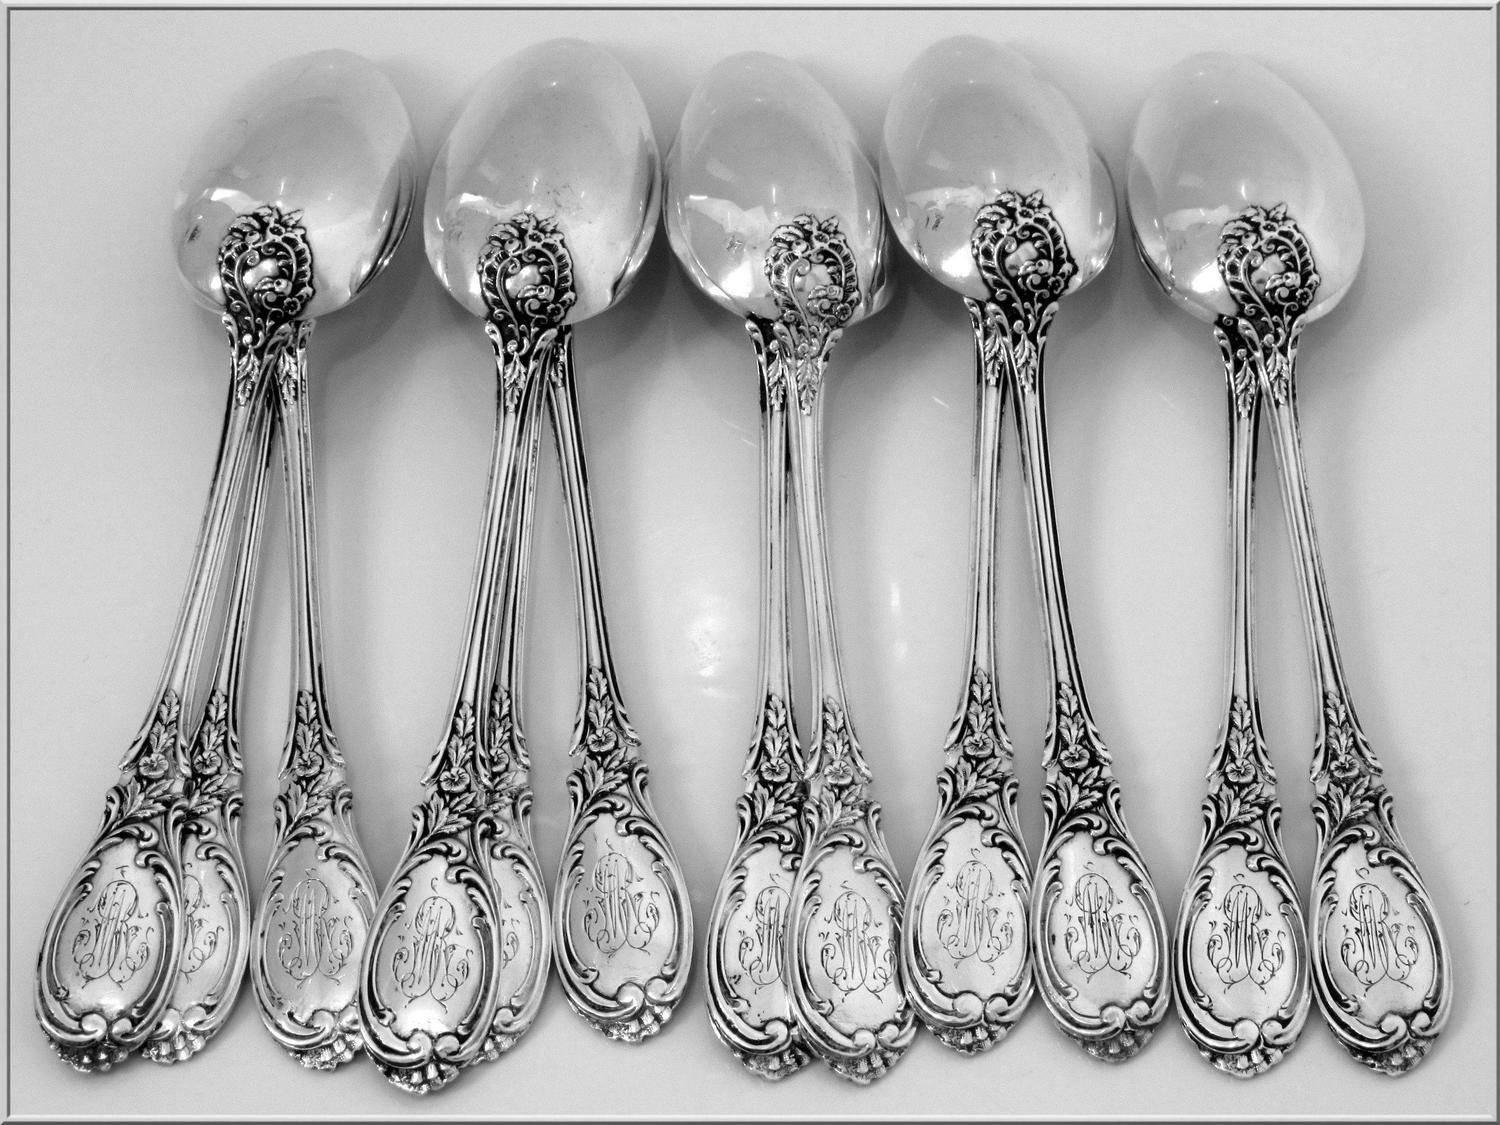 Late 19th Century Puiforcat French Sterling Silver Tea/Coffee/Dessert Spoons Set 12 pc Roses Box